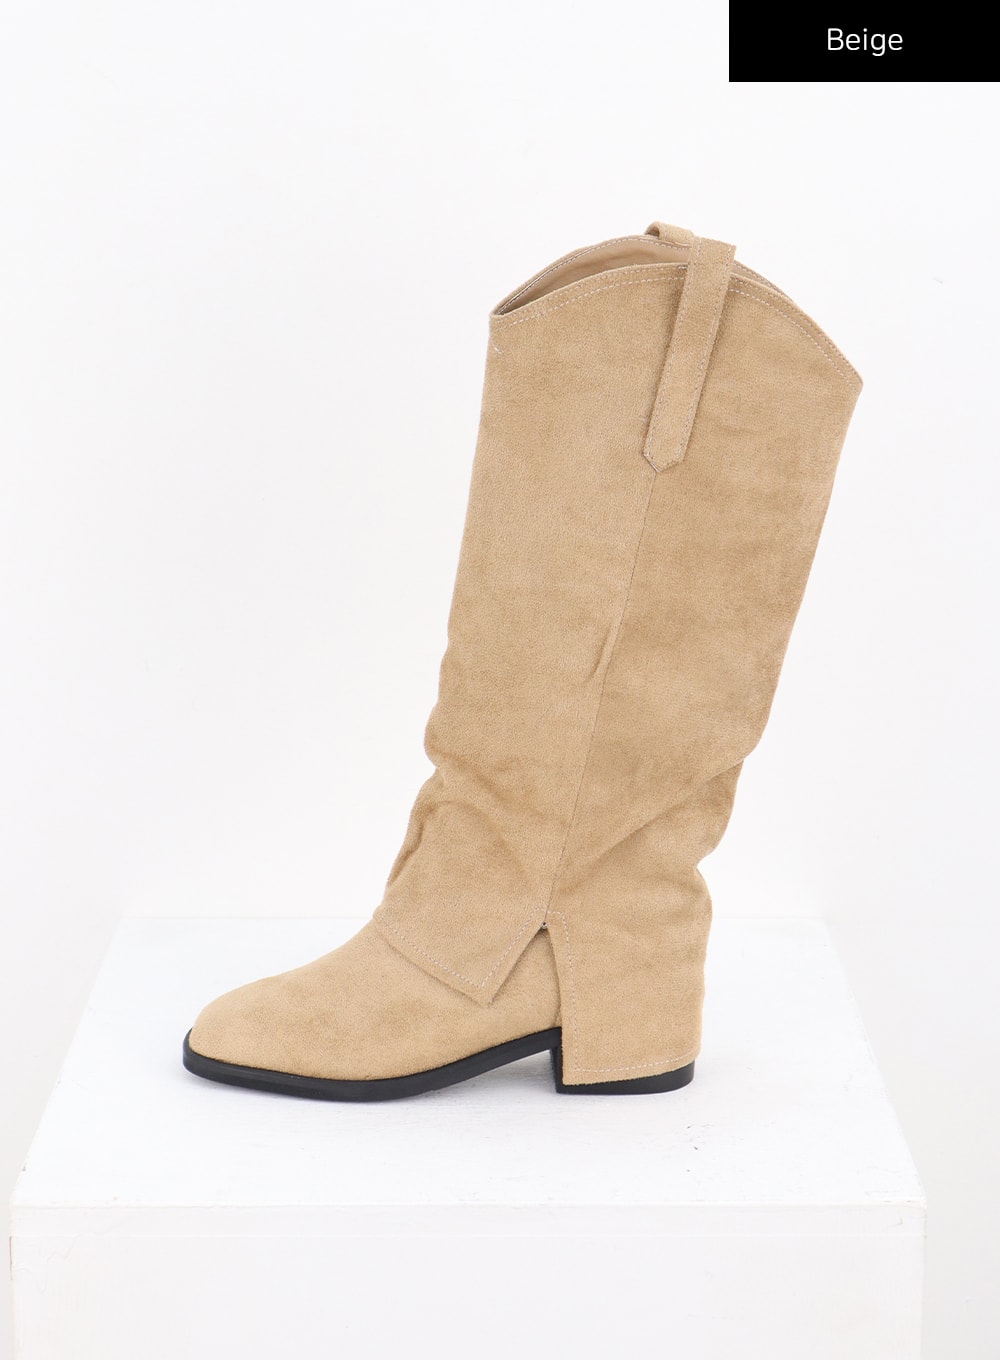 stitched-long-boots-co330 / Beige